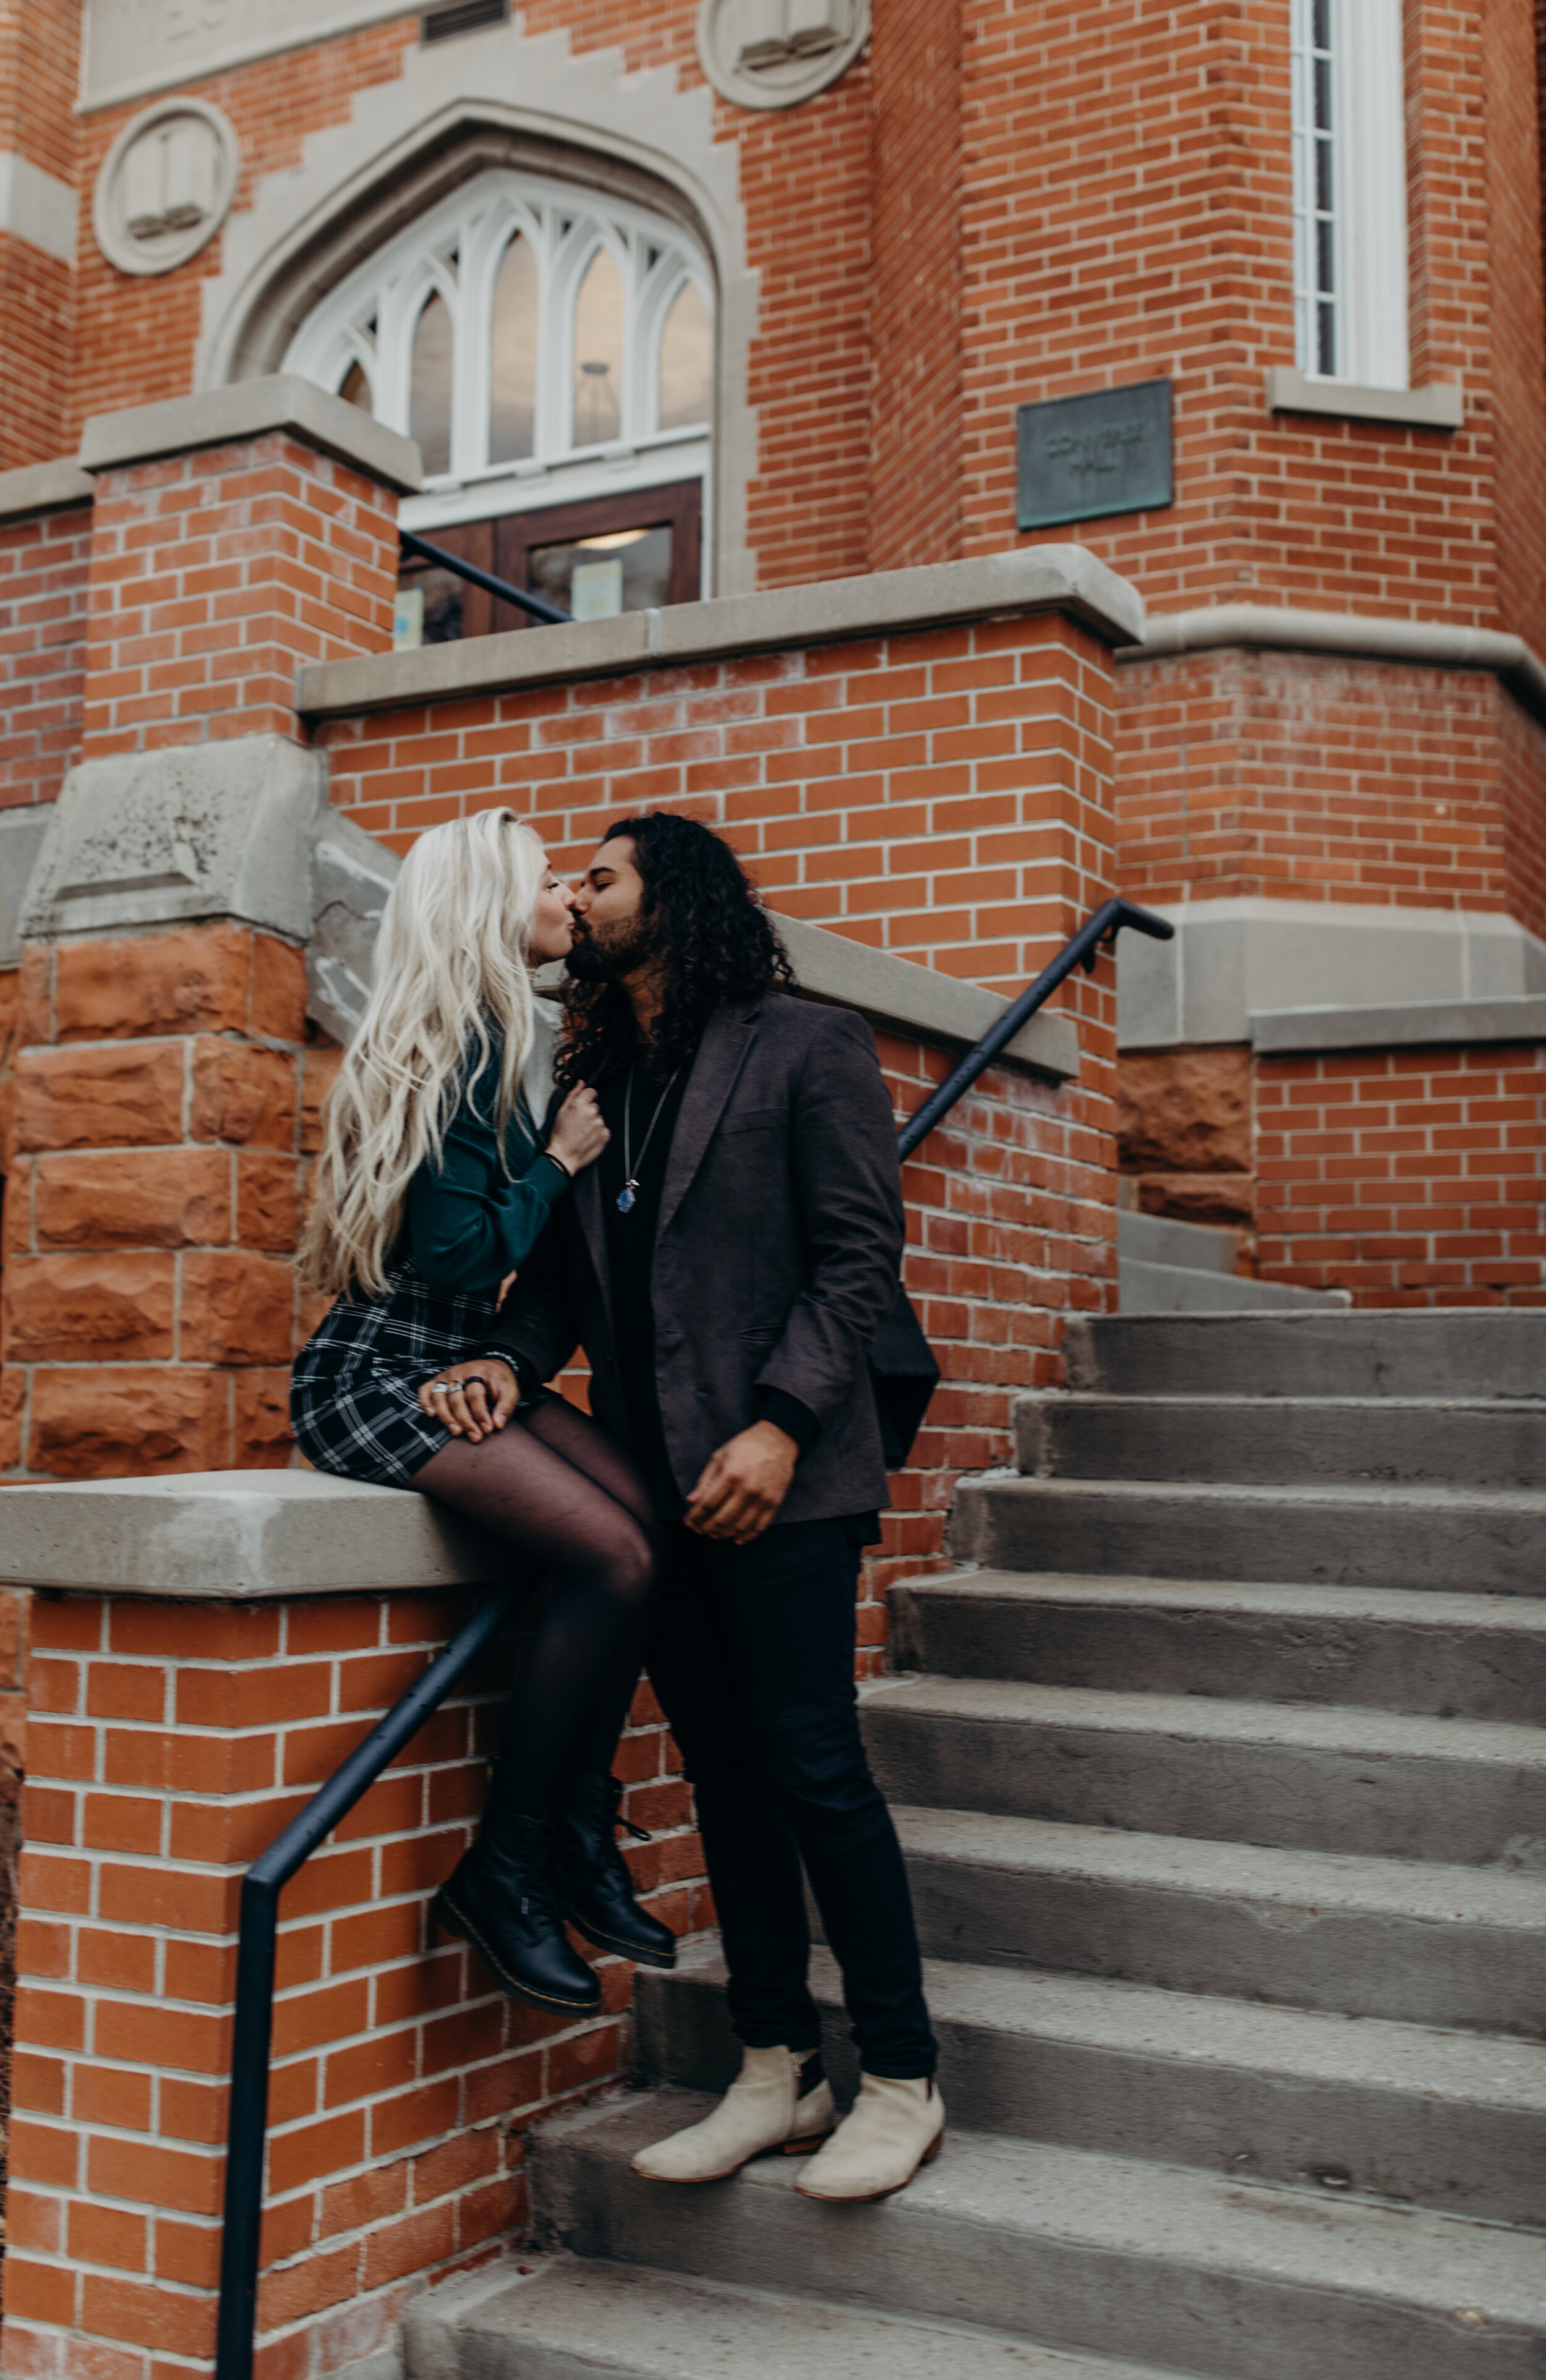 harry-potter-themed-engagement-photos-harry-potter-photoshoot-book-themed-photoshoot-nerd-couple-photoshoot-brayden-and-syd-photography